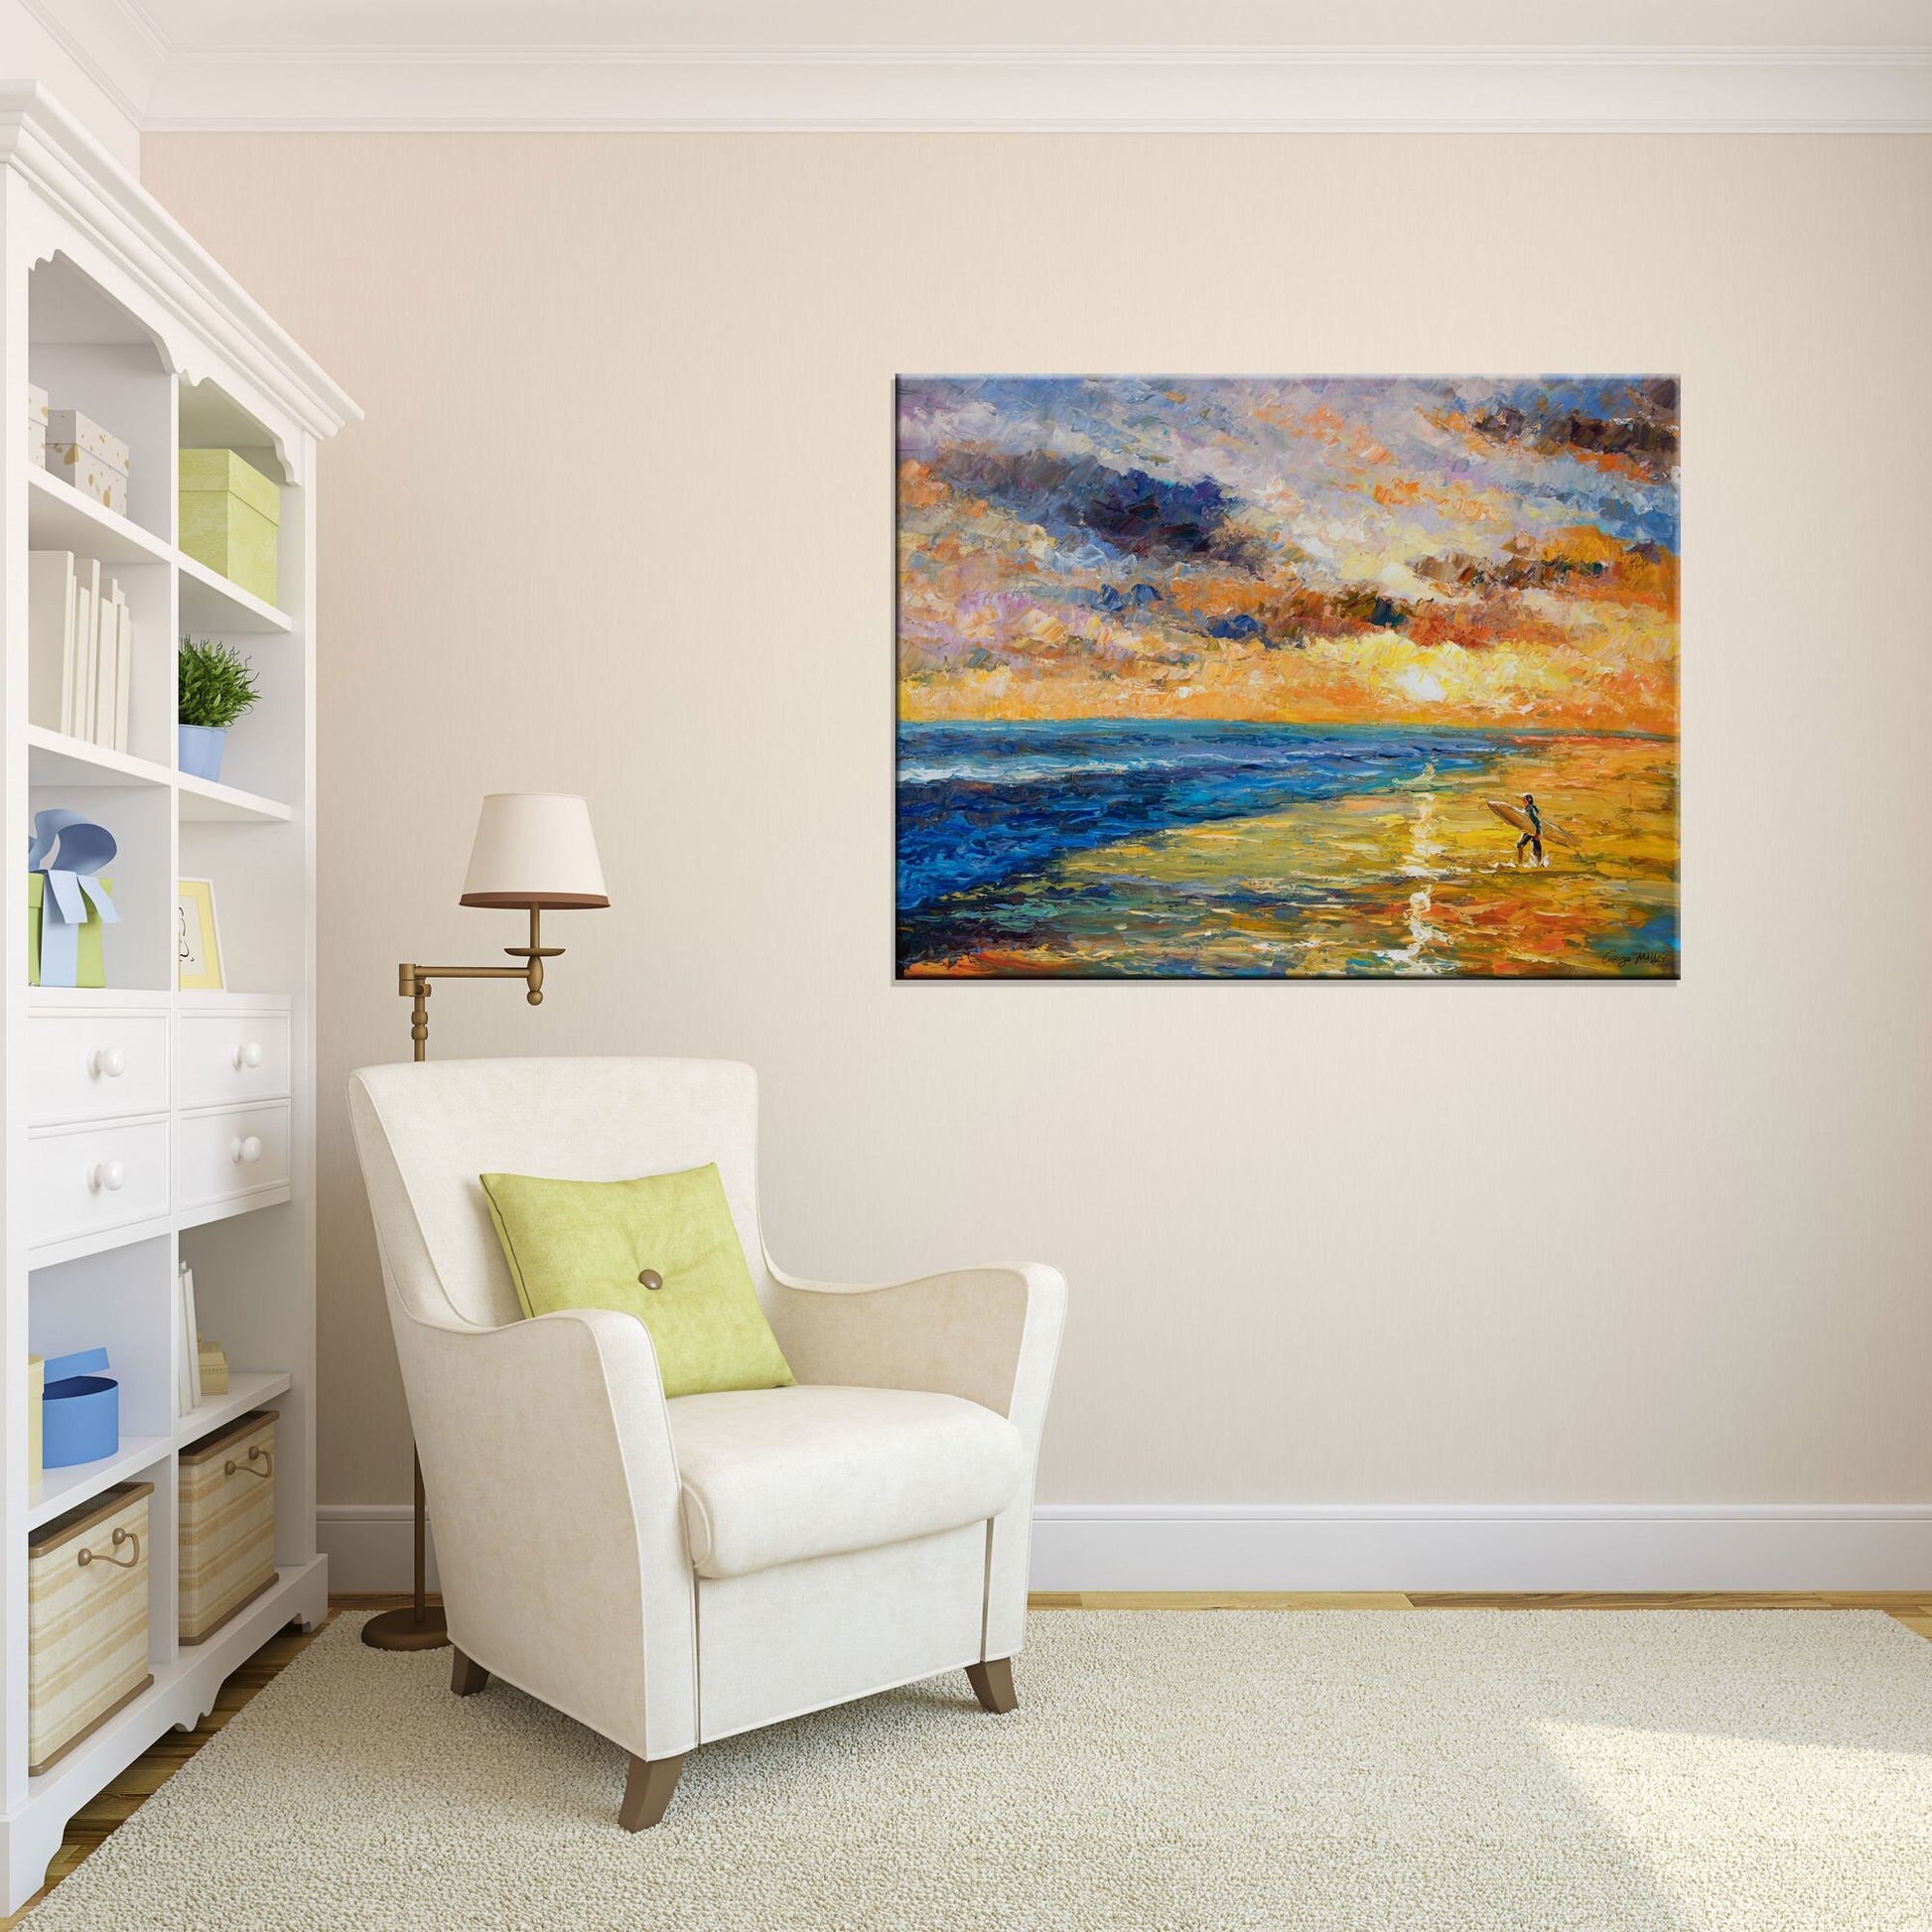 Oil Painting Seascape, Beach at Dawn, Contemporary Art, Original Painting, Large Canvas Art, Abstract Canvas Painting, Living Room Wall Art